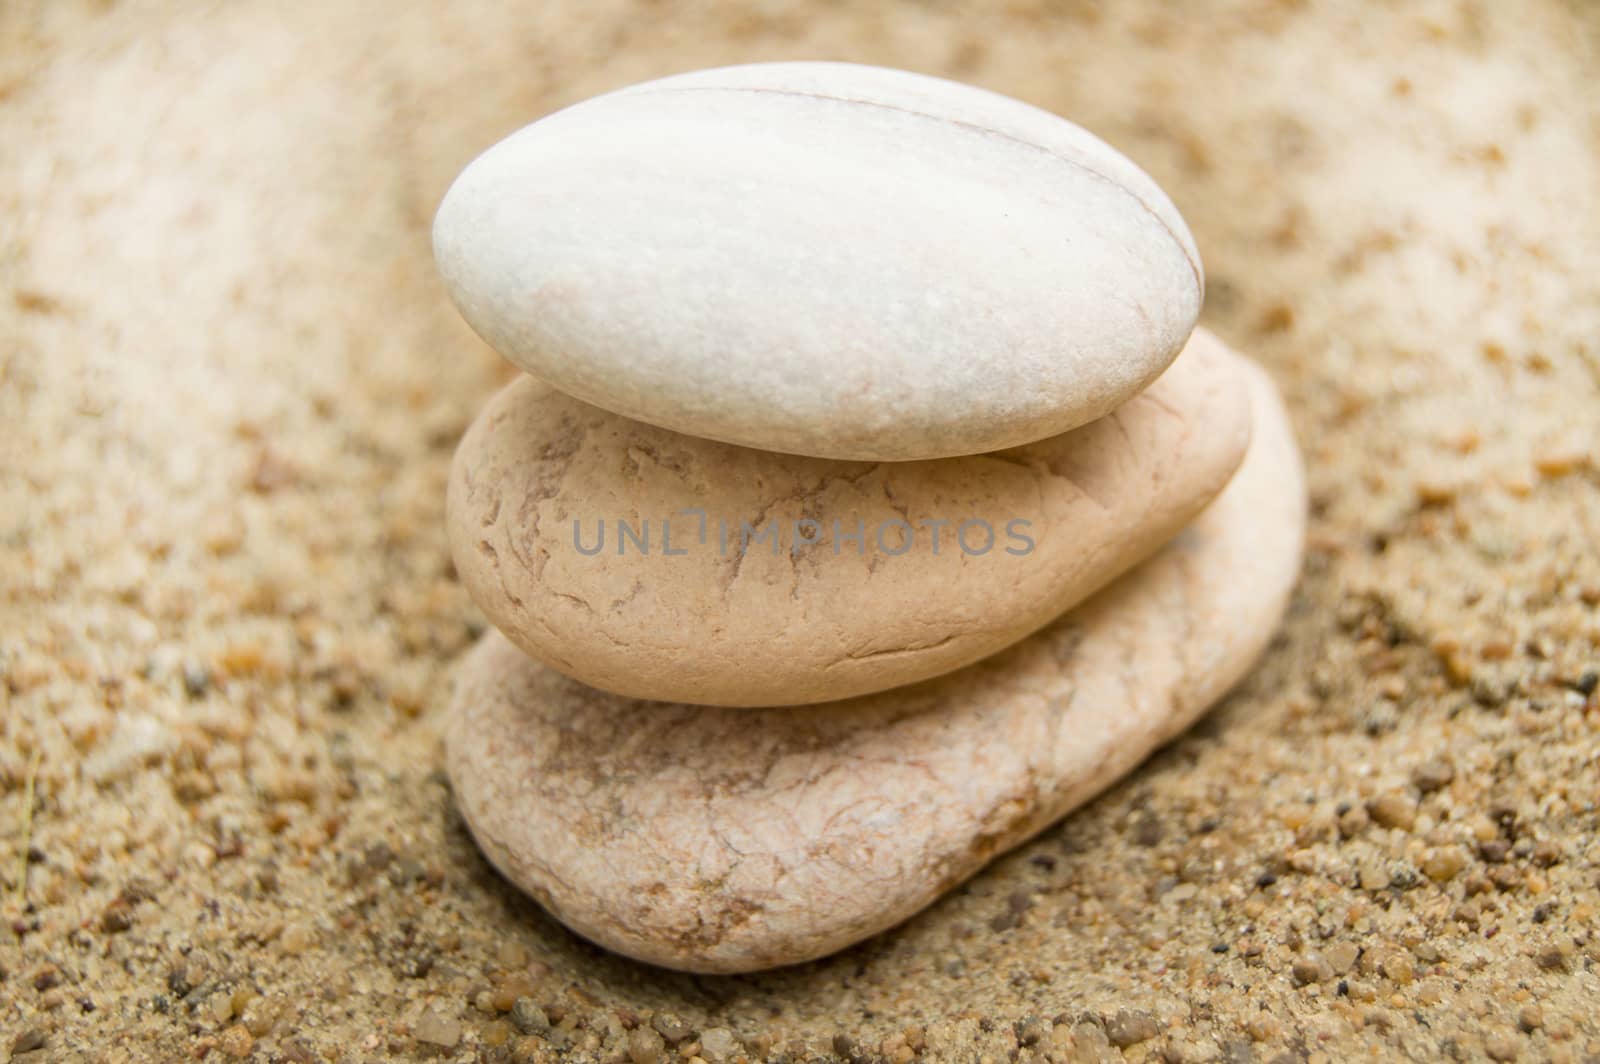 Zen stones on the beach for a perfect meditation, a blurred background.